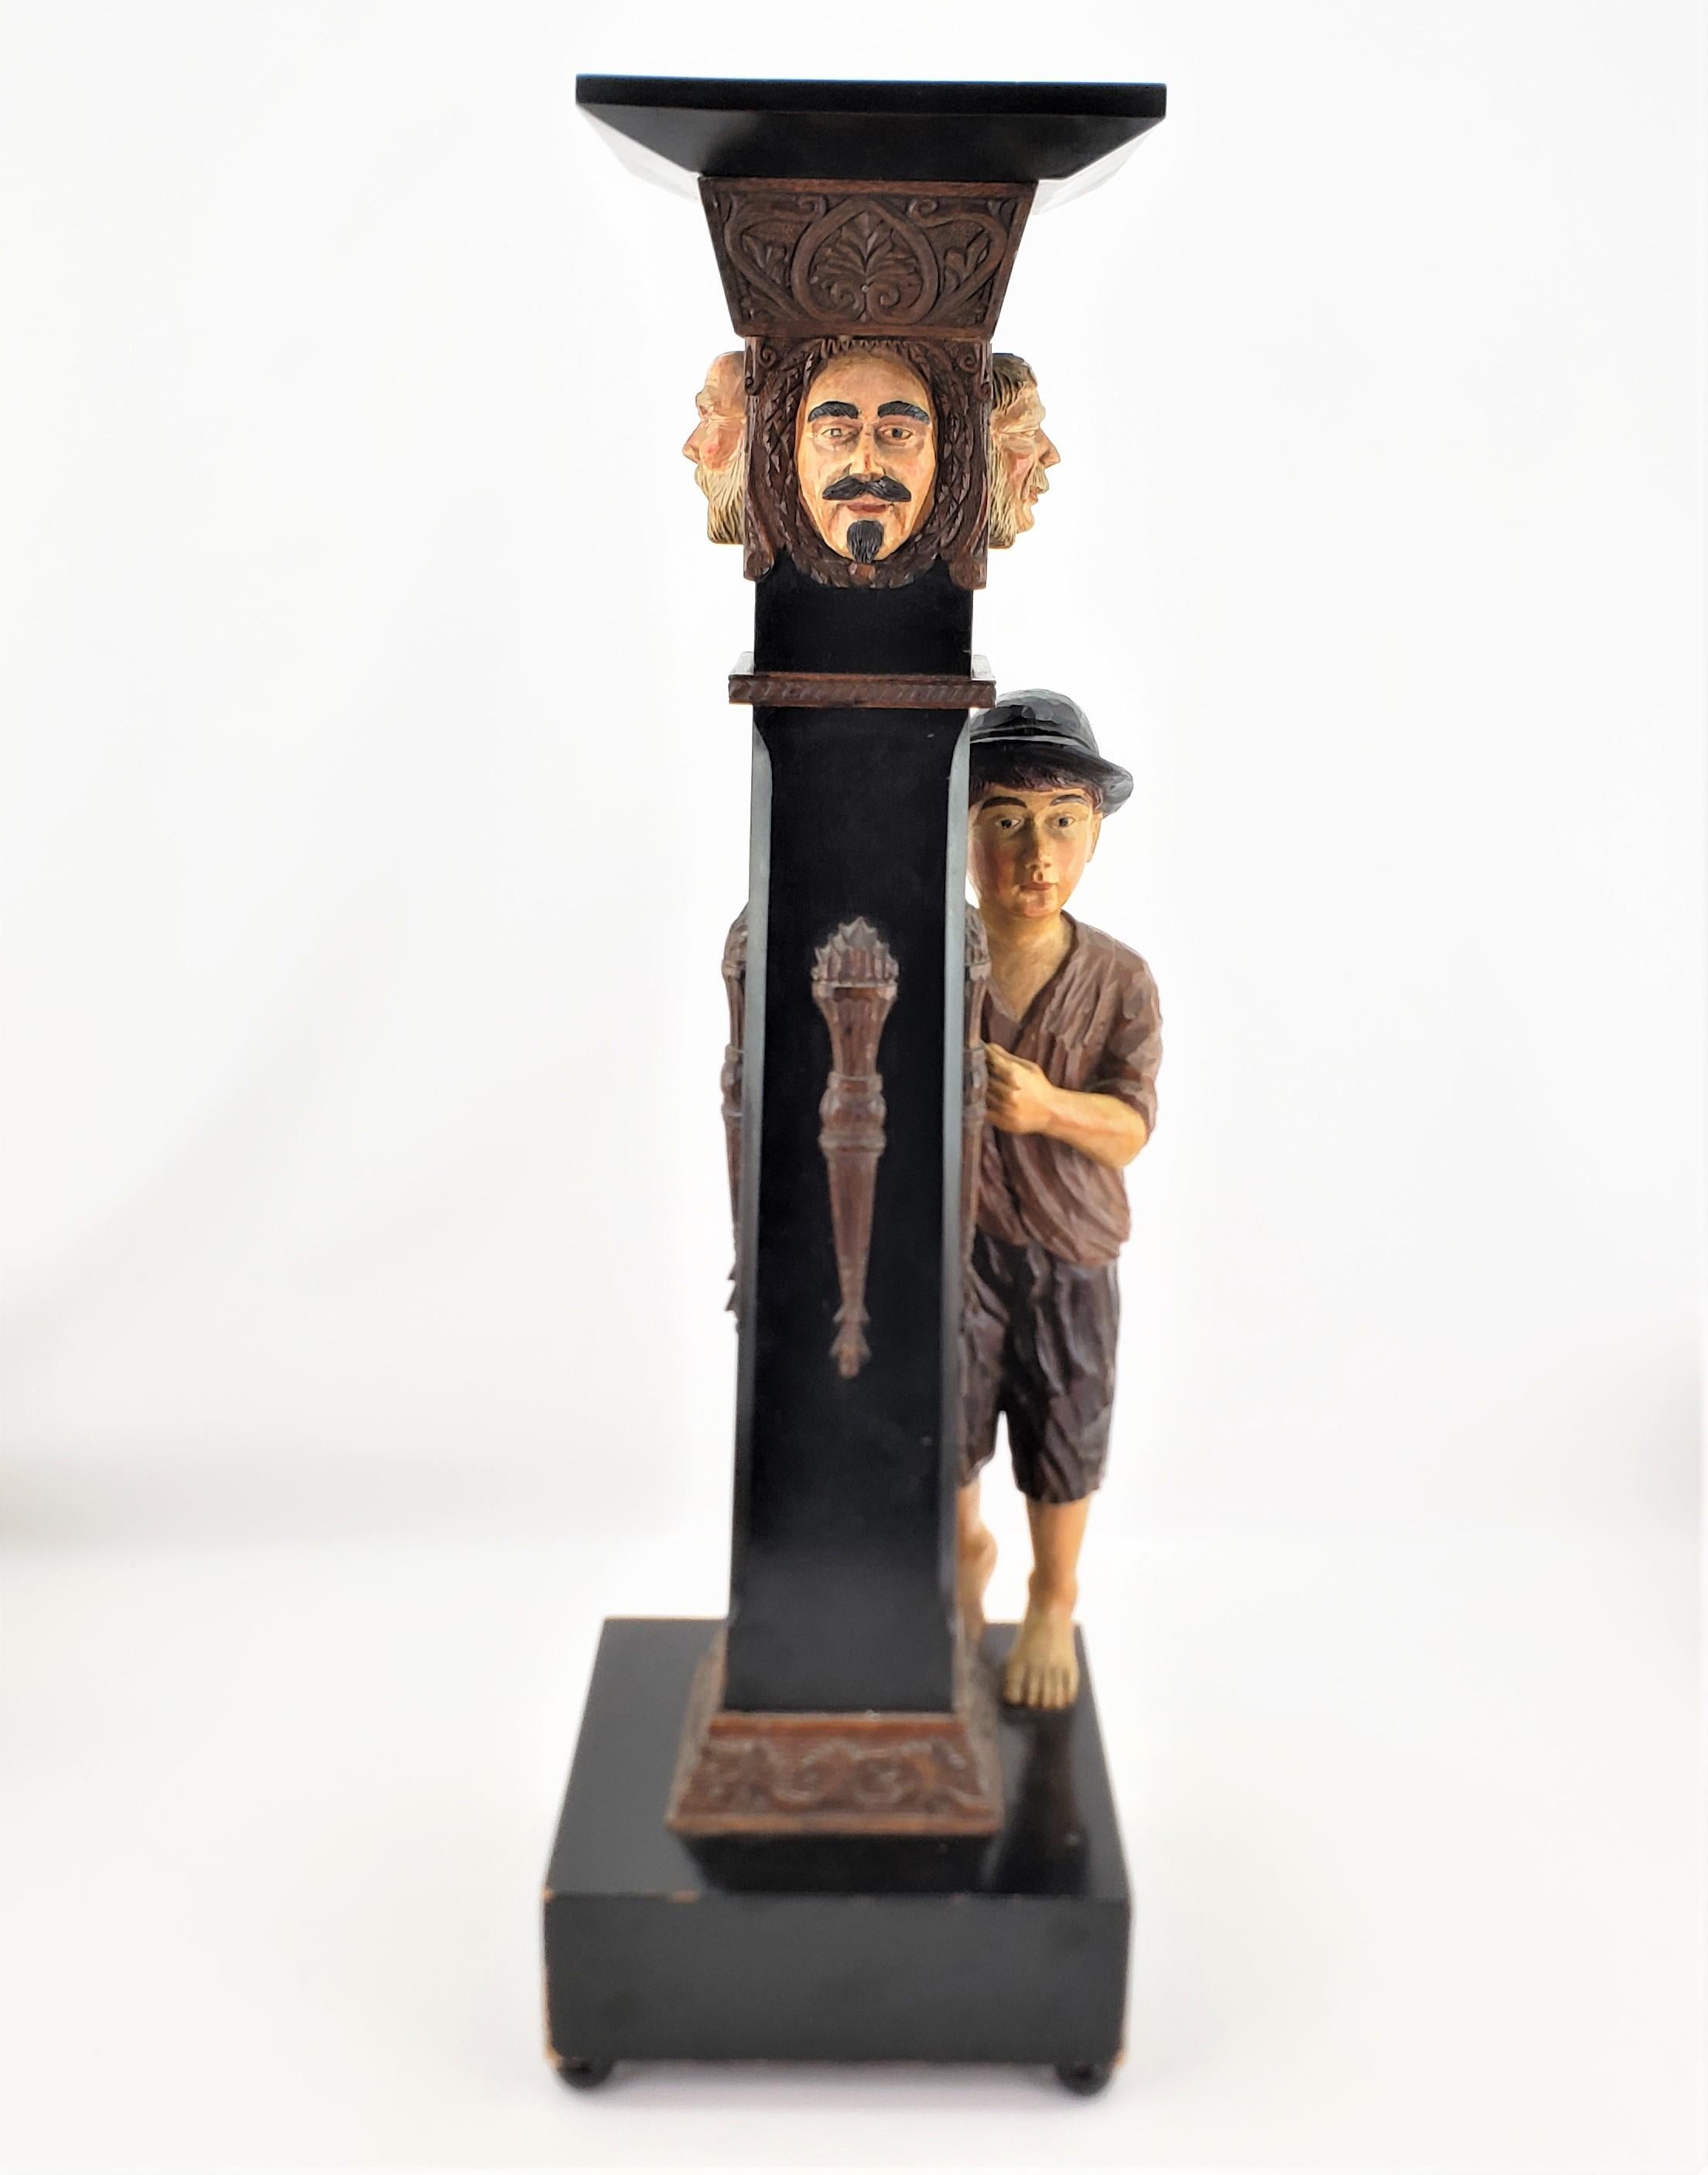 20th Century Antique Swiss or German Black Forest Styled Hand-Carved & Painted Pedestal For Sale